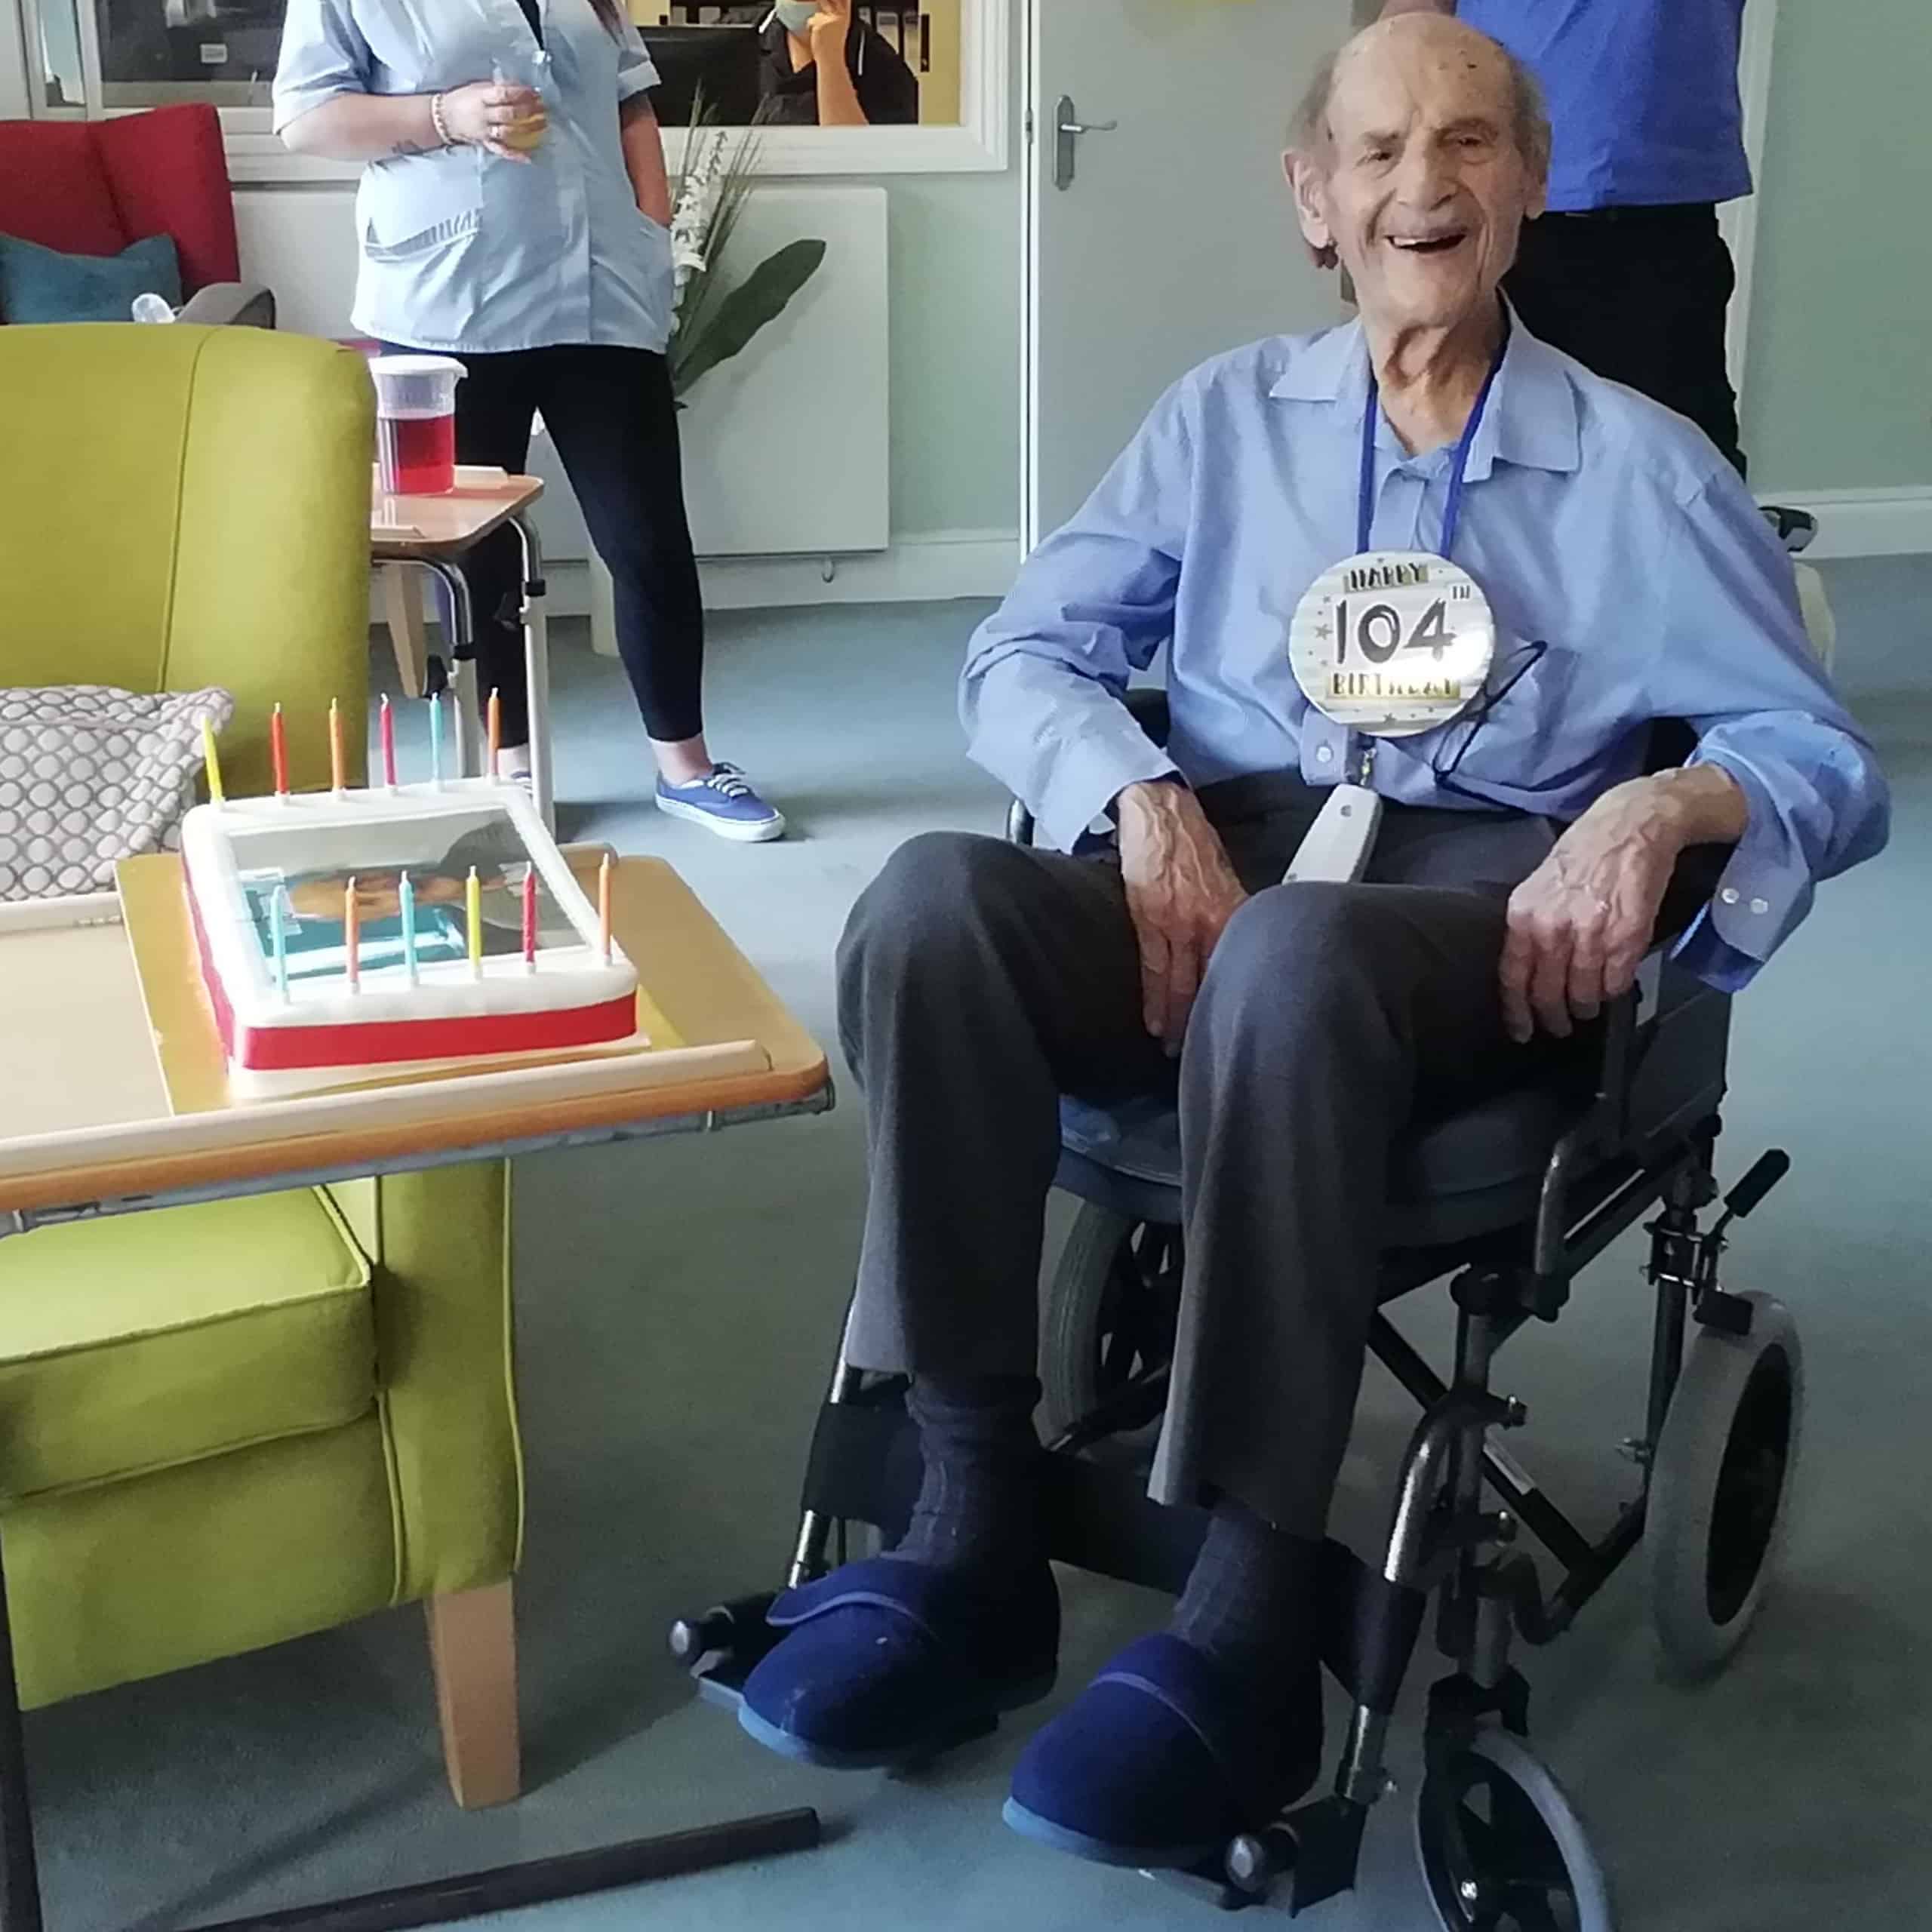 Patcham Nursing Home resident Len Goldman with his personalised cake on his 104th birthday.